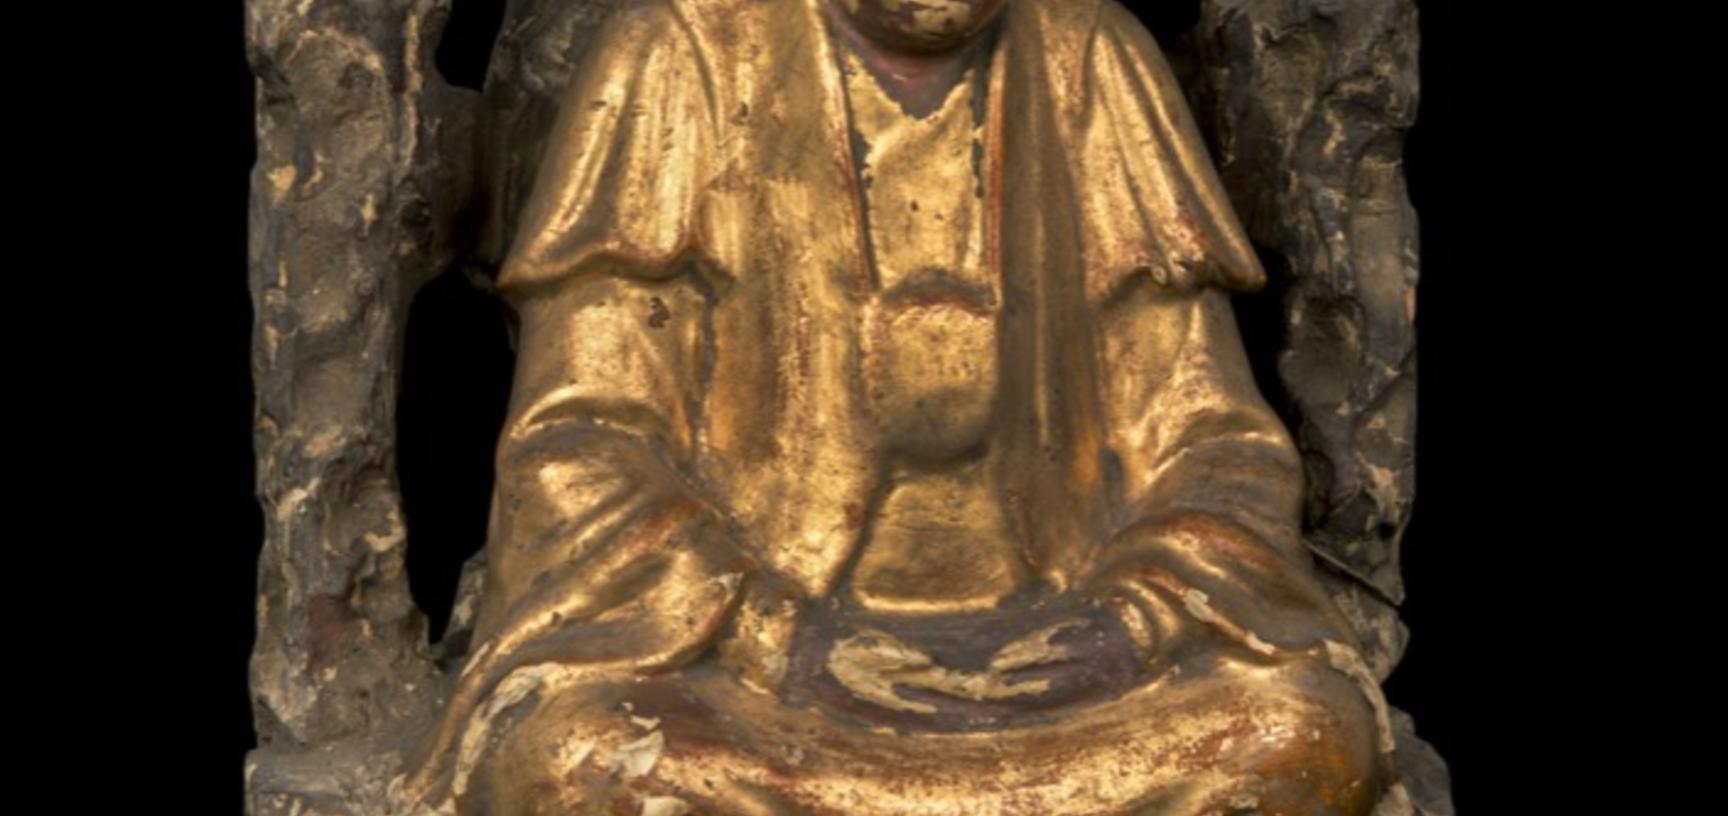 Wooden figure gilded in gold, seated under a bush.